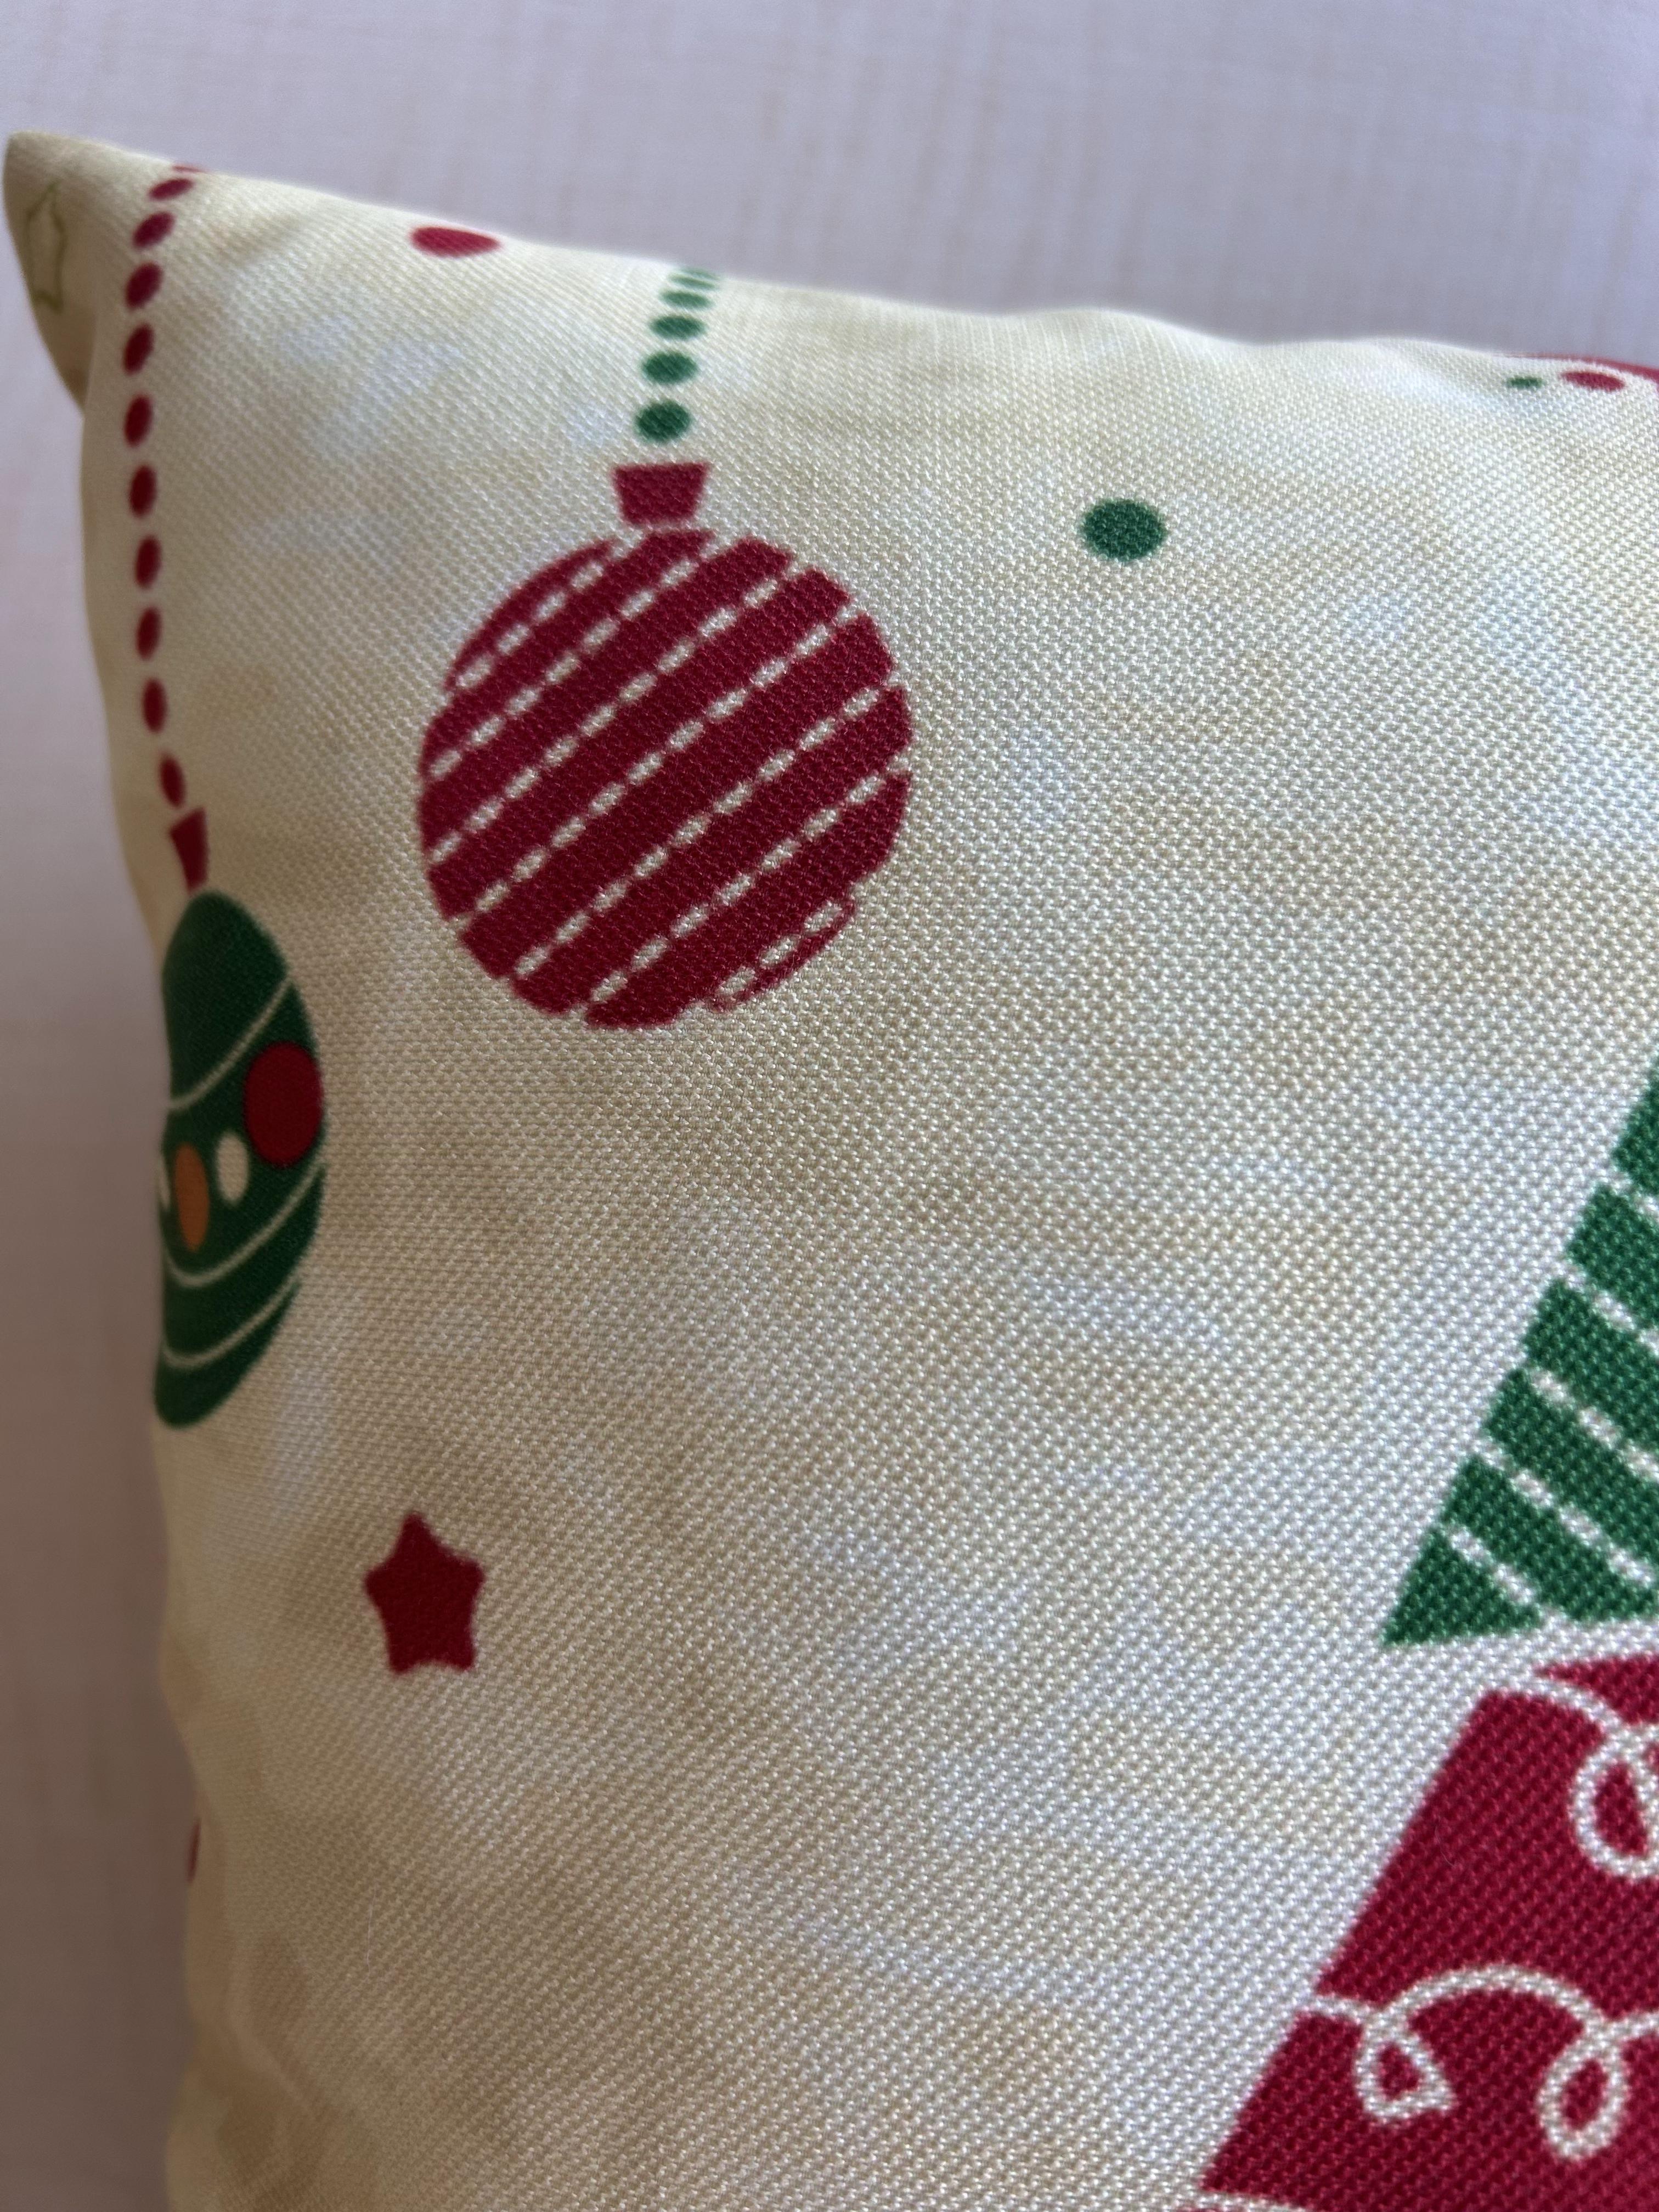 Abstract Christmas Tree Pattern Pillow Cover, Holiday, Decorating, Square 16" x 16" - Wear Sierra